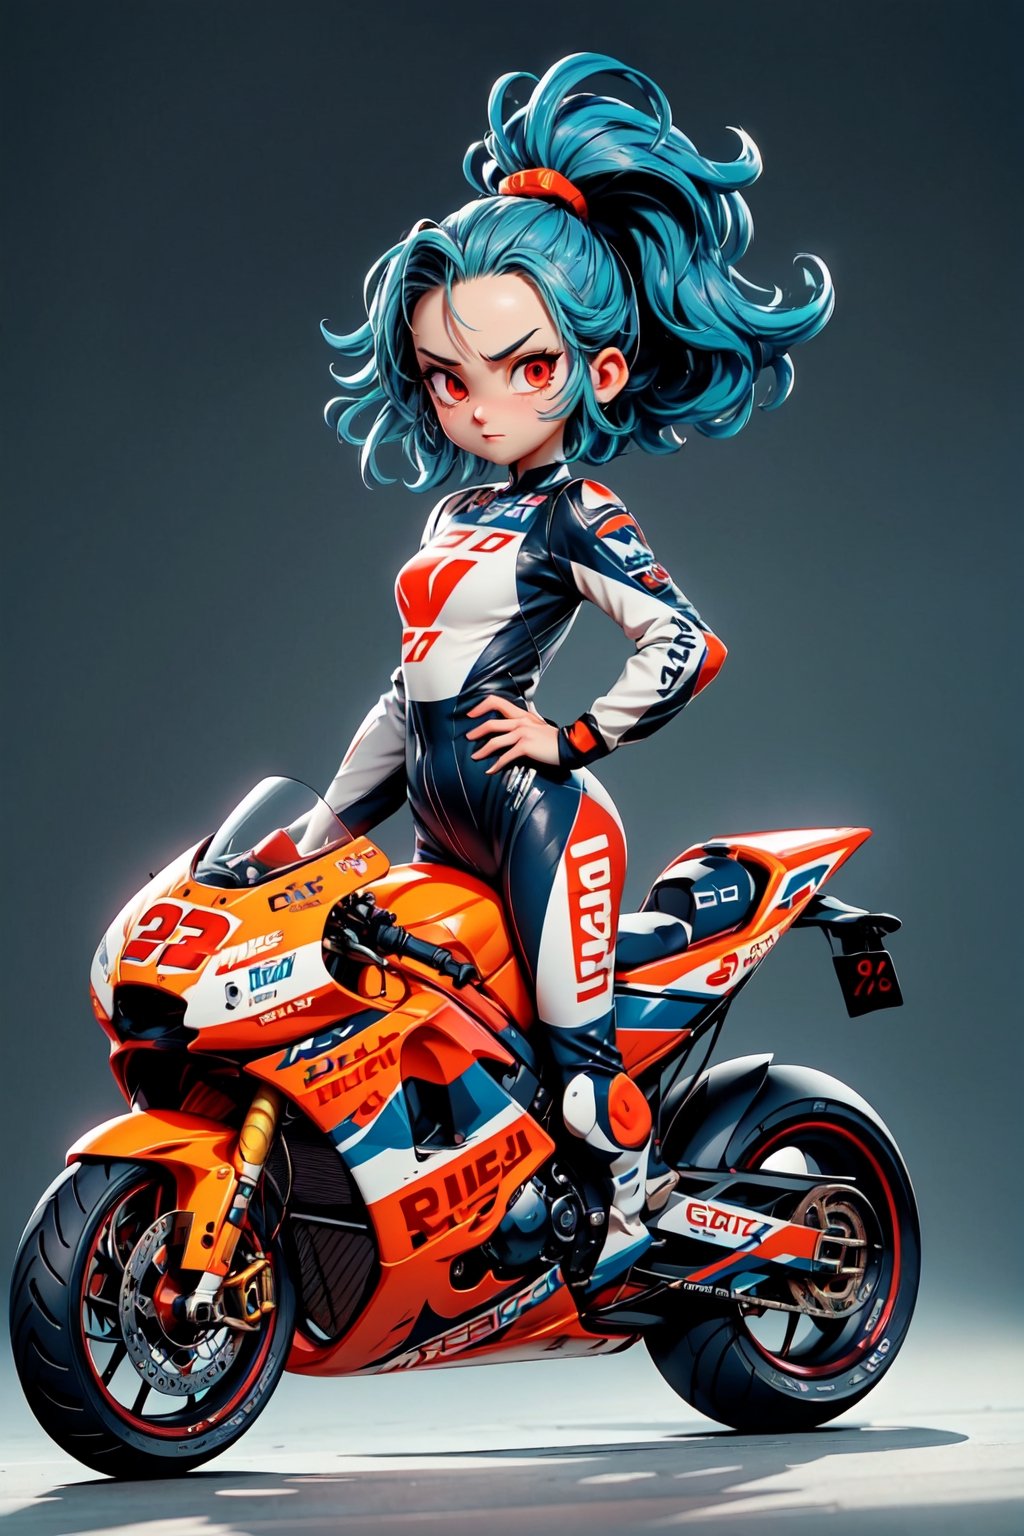 (best quality), (UHQ, 8k, high resolution), Generate a pixel art masterpiece featuring a solo anime girl with a sporty, moto-inspired aesthetic. The character boasts vibrant, electric blue hair, and her red eyes gleam with intensity. Dressed in a cutting-edge MotoGP racing suit with sleek sponsor logos, she strikes a dynamic and confident pose. The atmosphere should convey a thrilling sense of speed and victory, with the character radiating charm and charisma, subtly expressing a connection with the viewer. Ensure the pixel art is of ultra resolution, adopting a dynamic aspect ratio, and capturing the essence of 'simple --niji' and 'kpop girl' styles. Emphasize the character's forehead, sleek physique, and infuse the scene with an energetic and endearing expression.